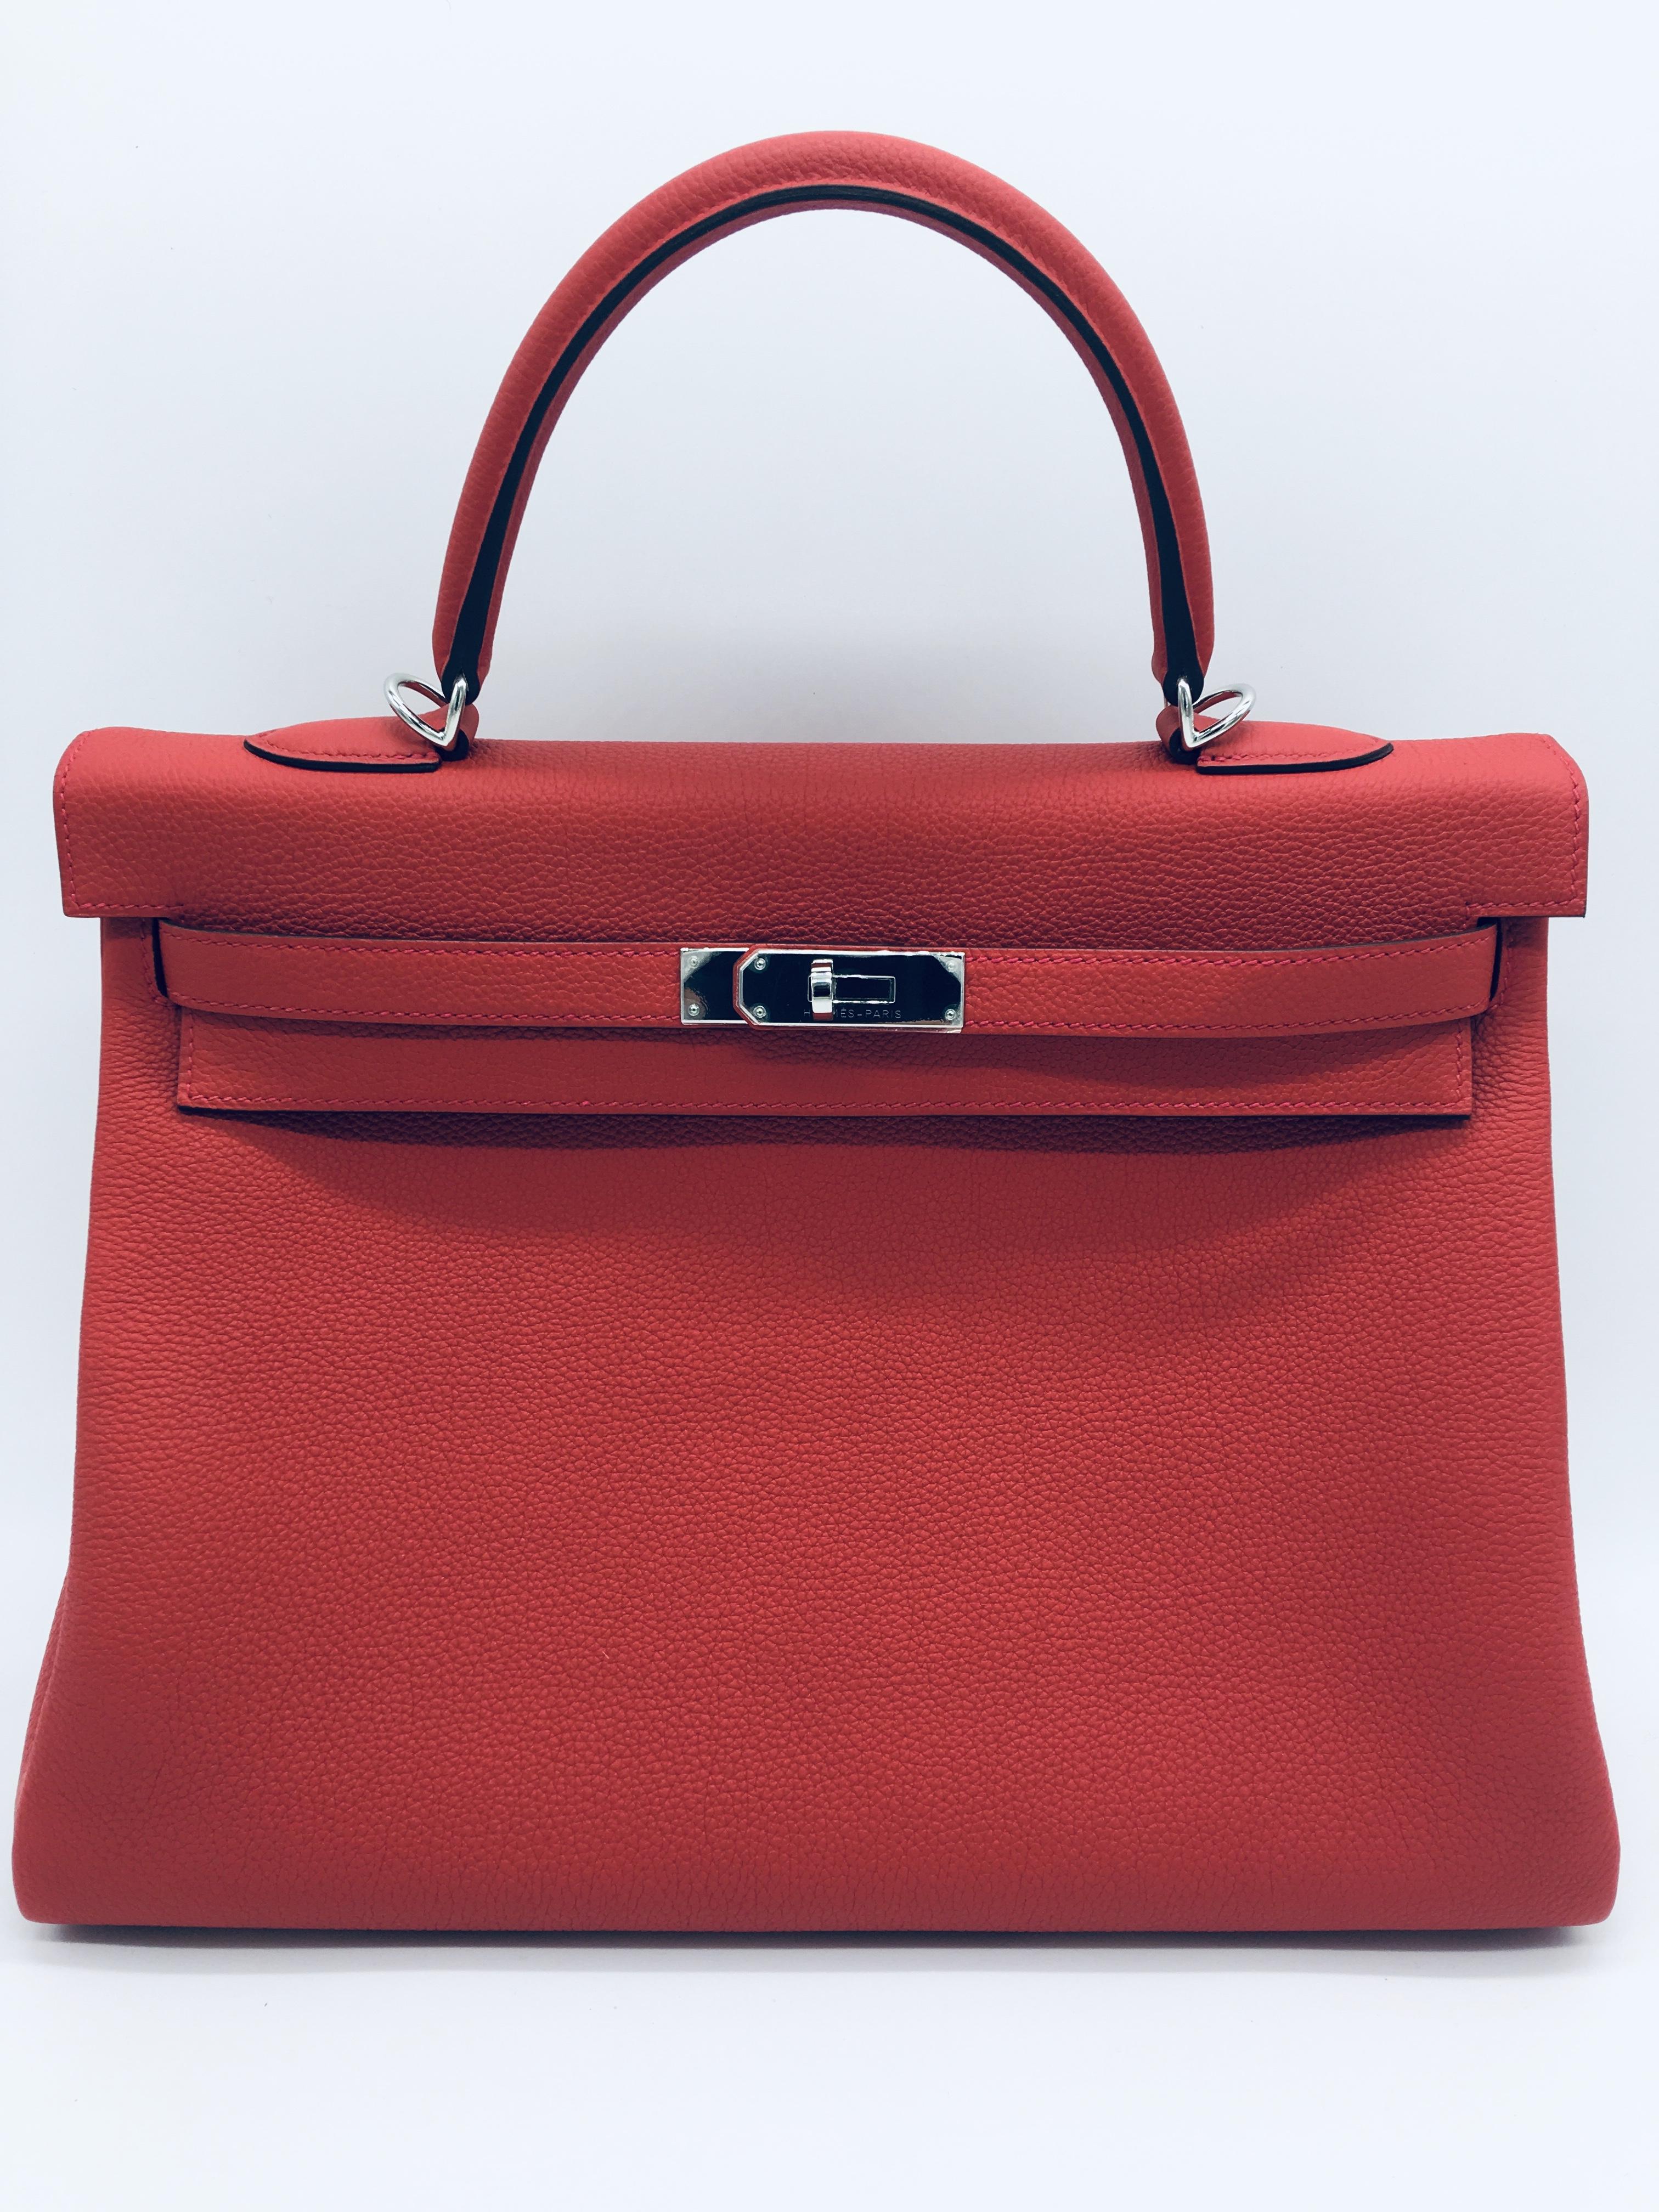 Hermes produces some fabulous reds and Geranium is no exception – we love it! Bright red with a slight orange undertone it’s perfect for bringing a splash of colour to any outfit, any time. This is an X stamp 35cm Kelly in Togo Leather with